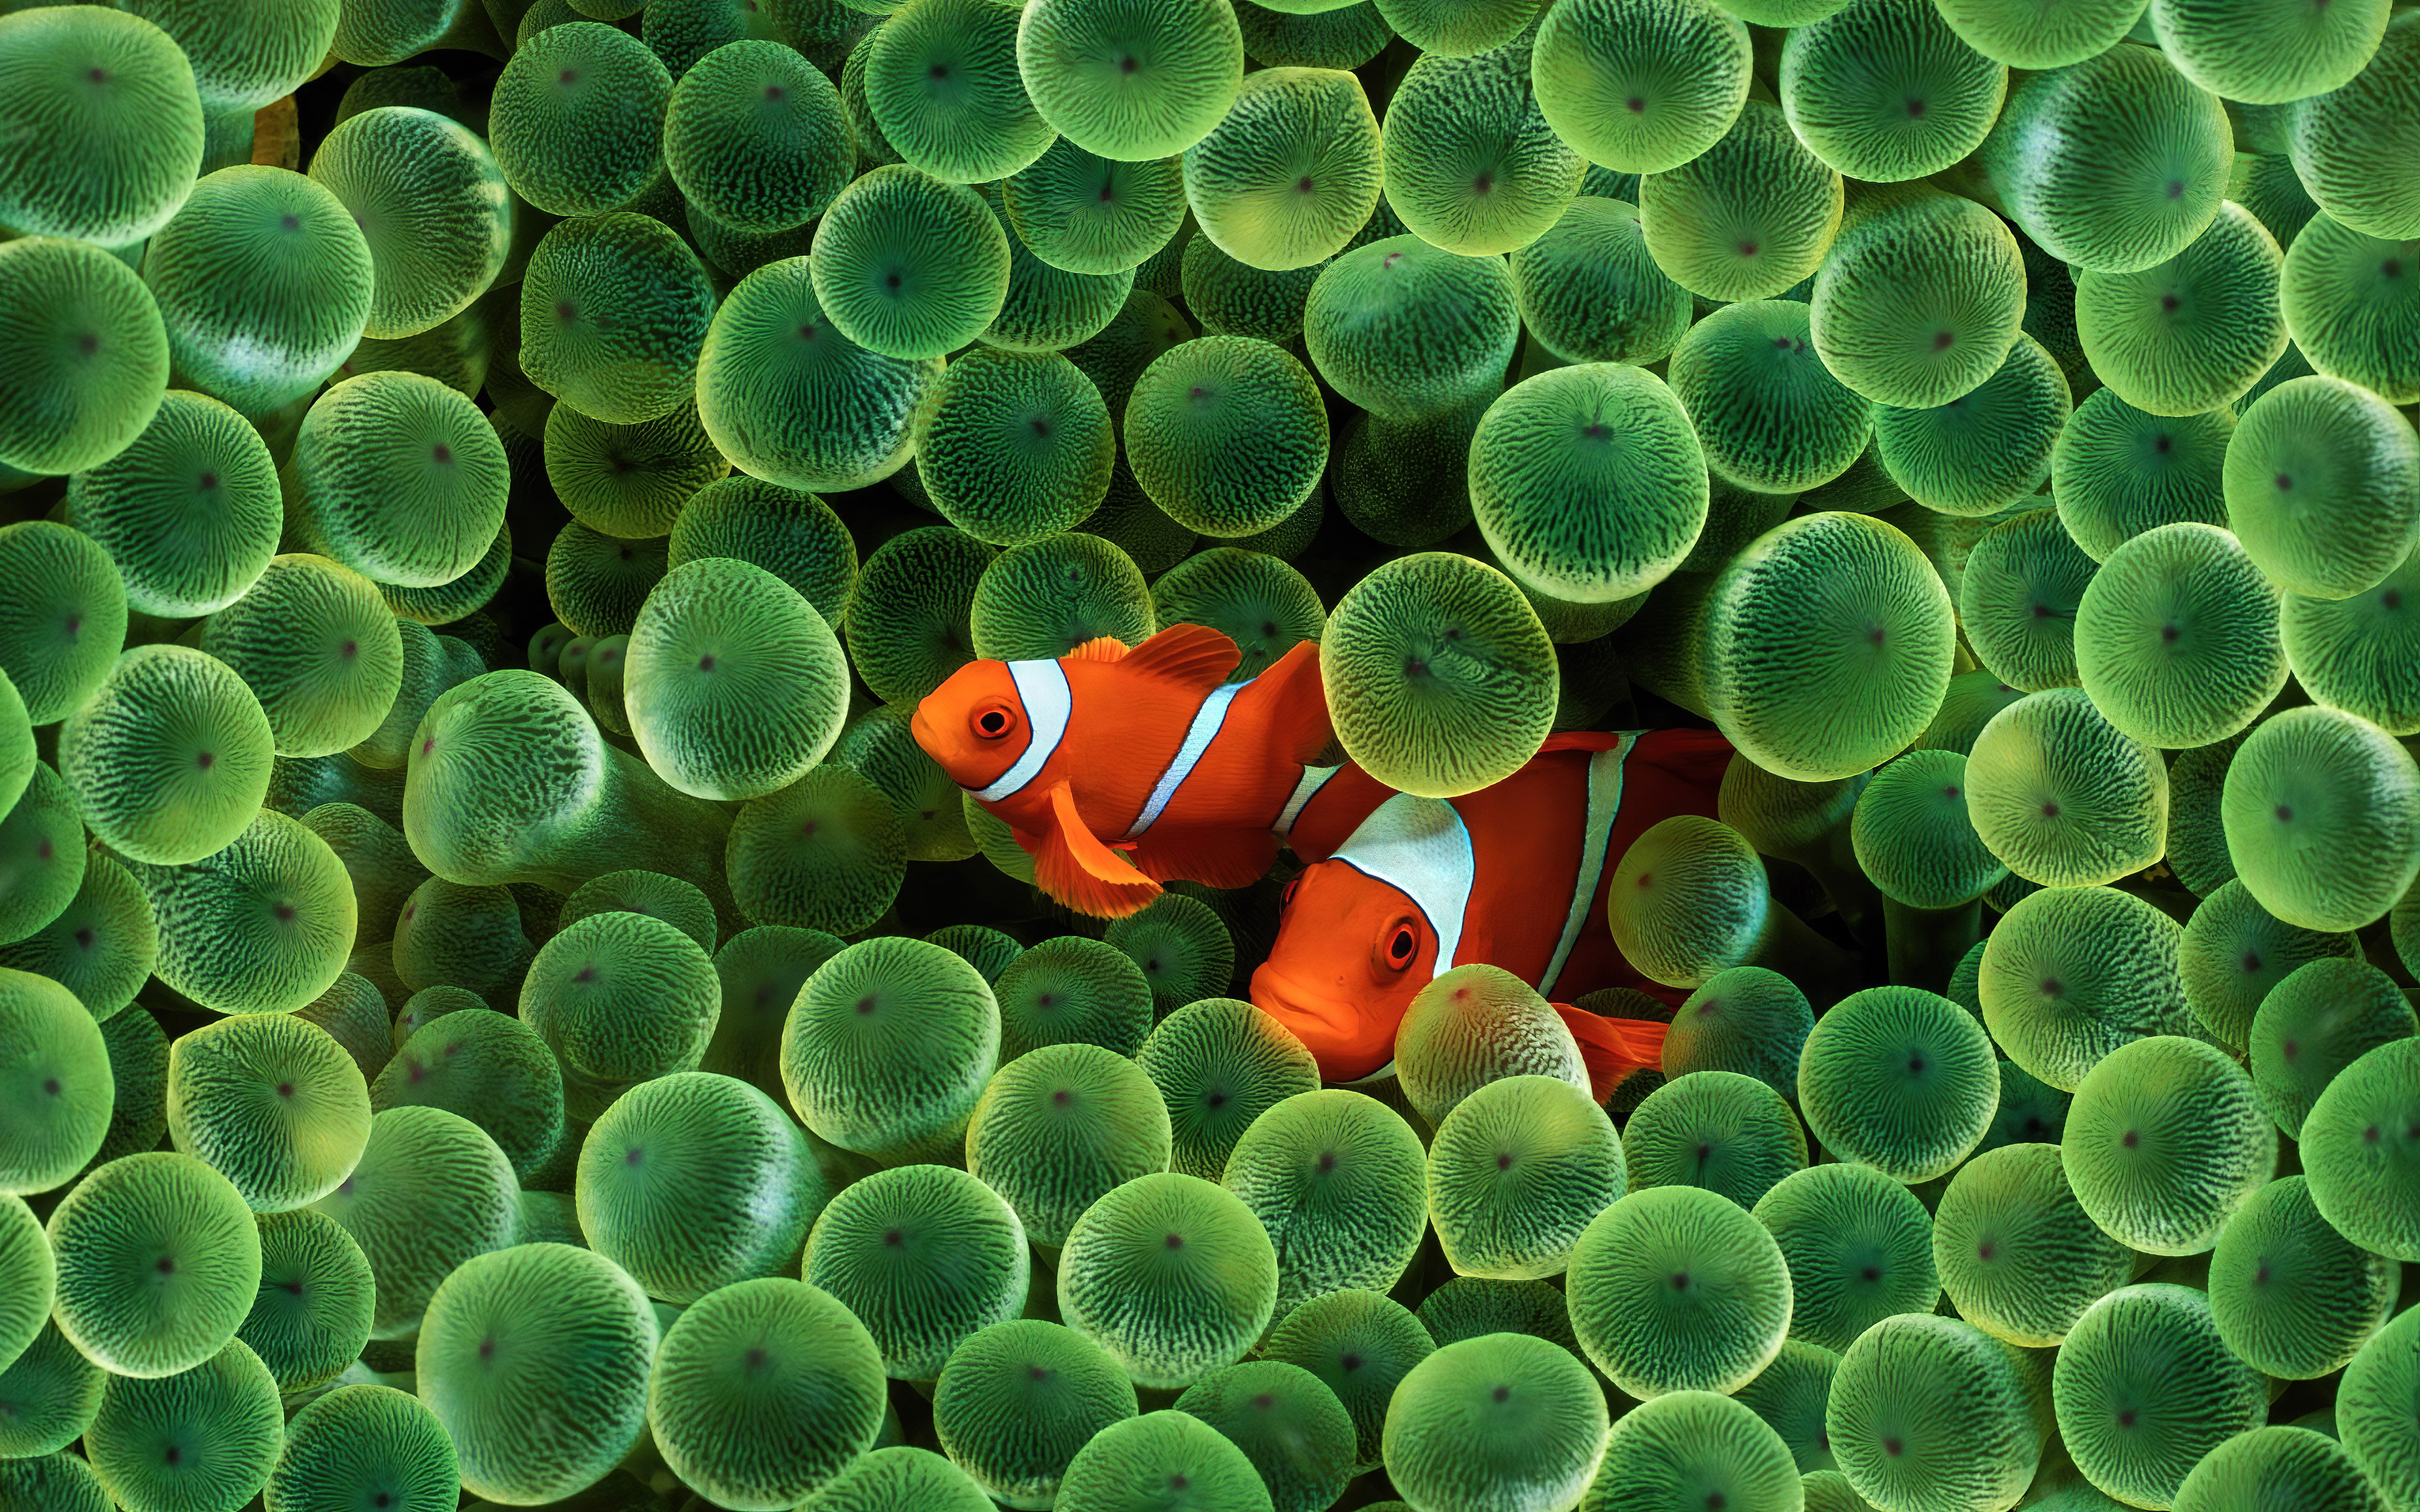 The old apple clown fish wallpaper upscaled to x rwallpapers